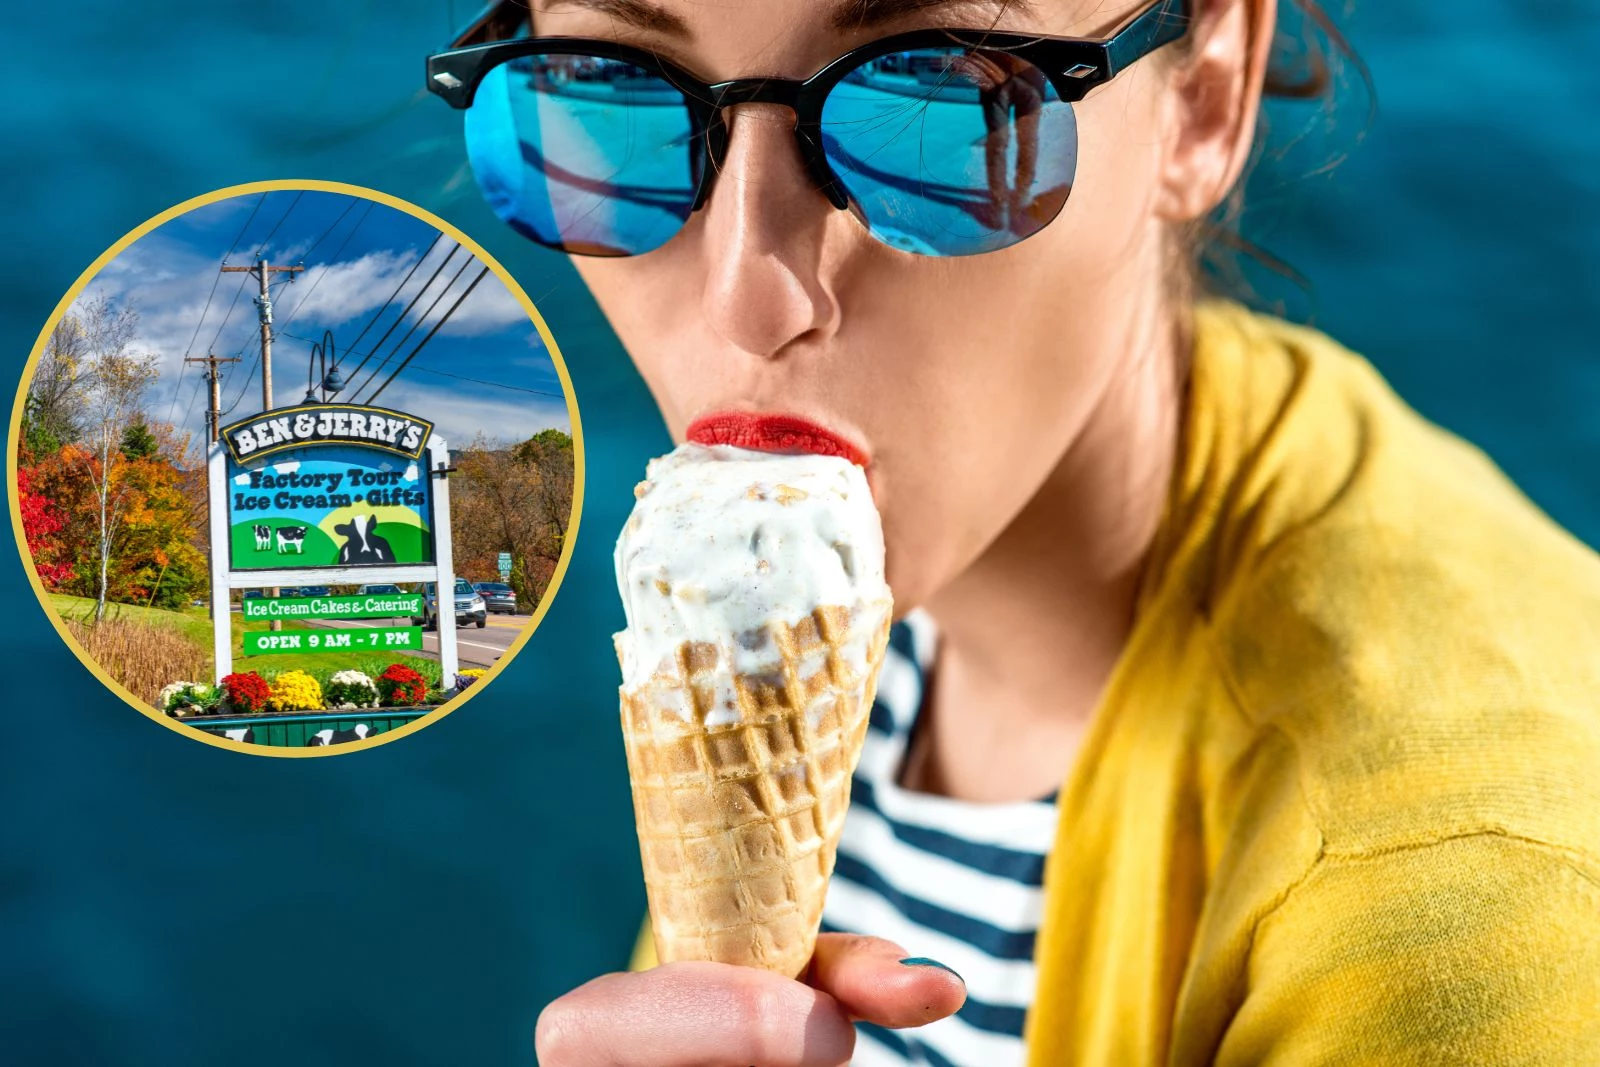 Best Job Ever: MA Woman Paid to Sample Ben & Jerry's Ice Cream